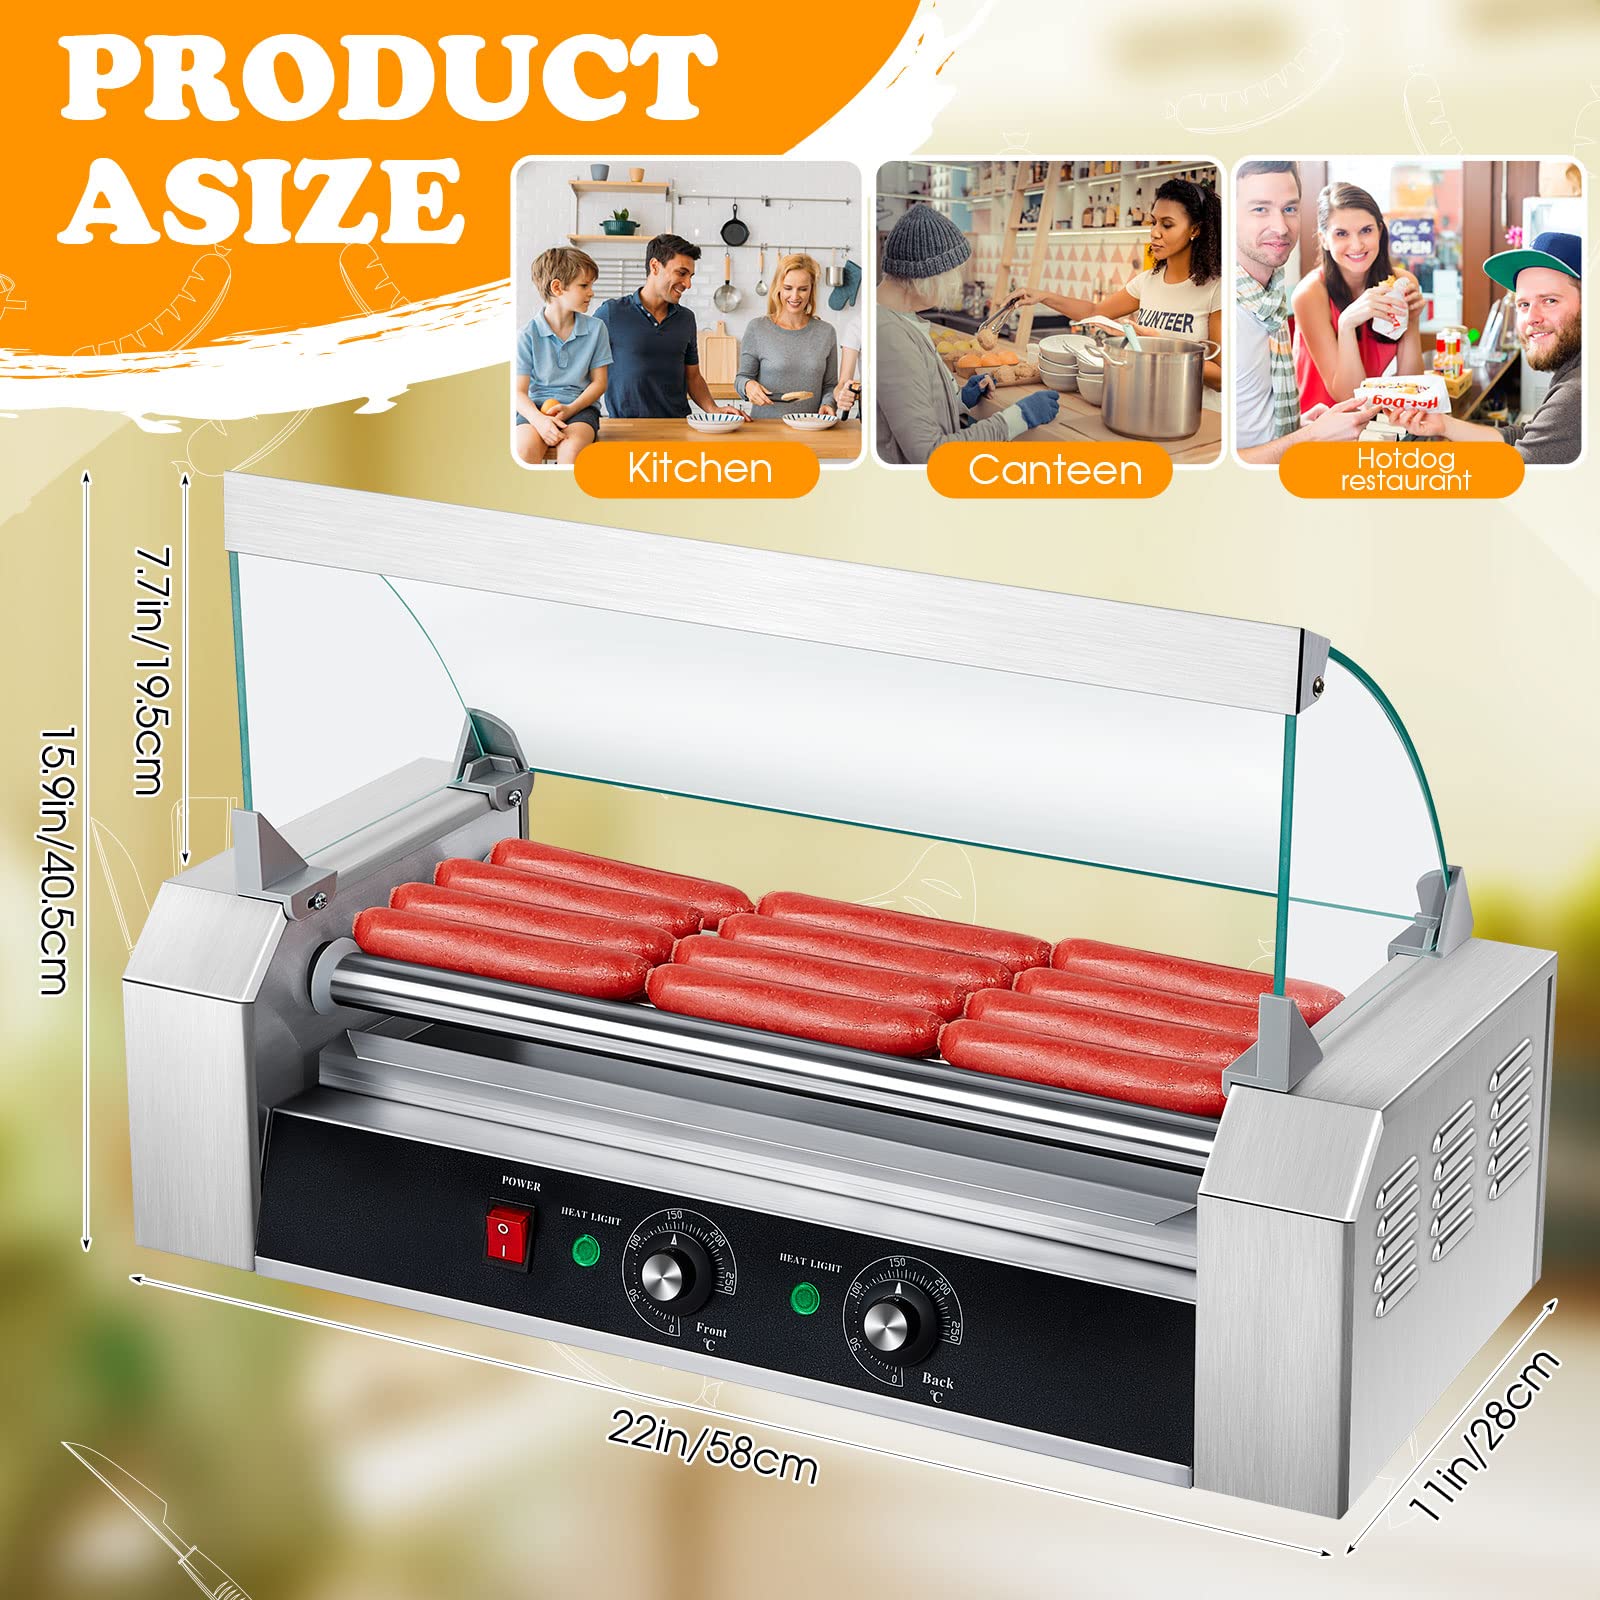 110V Hot Dog Roller Machine 5 Roller 12 Hot Dog Capacity Electric Grill Cooker Machine with Cover Stainless Steel Hot Dog Roller Warmer Sausage Maker for Both Commercial and Household Use